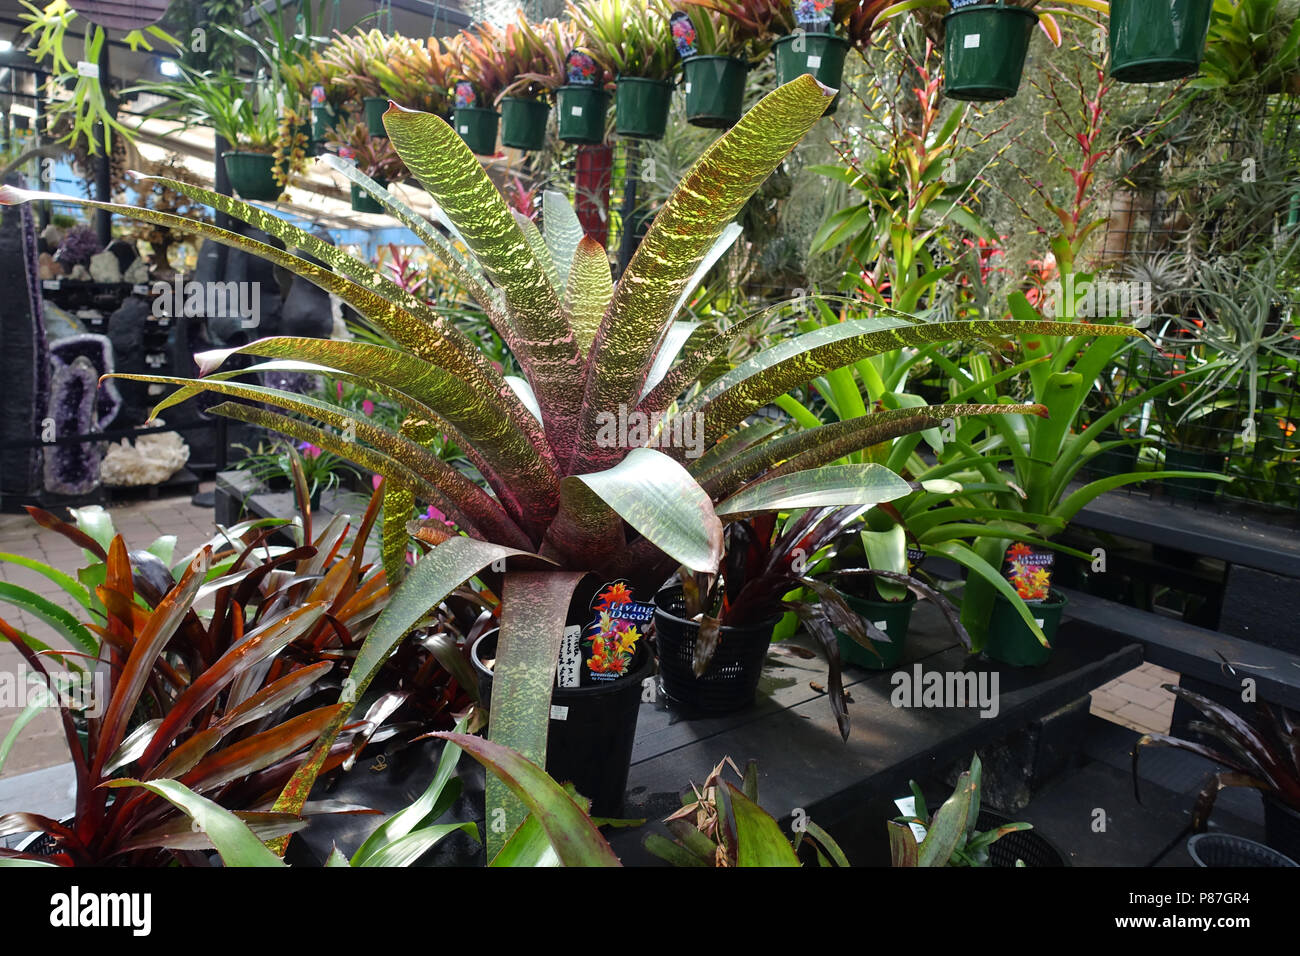 Mixed colours of Vriesea plants or known as Vriesia draco Bromeliad Stock Photo